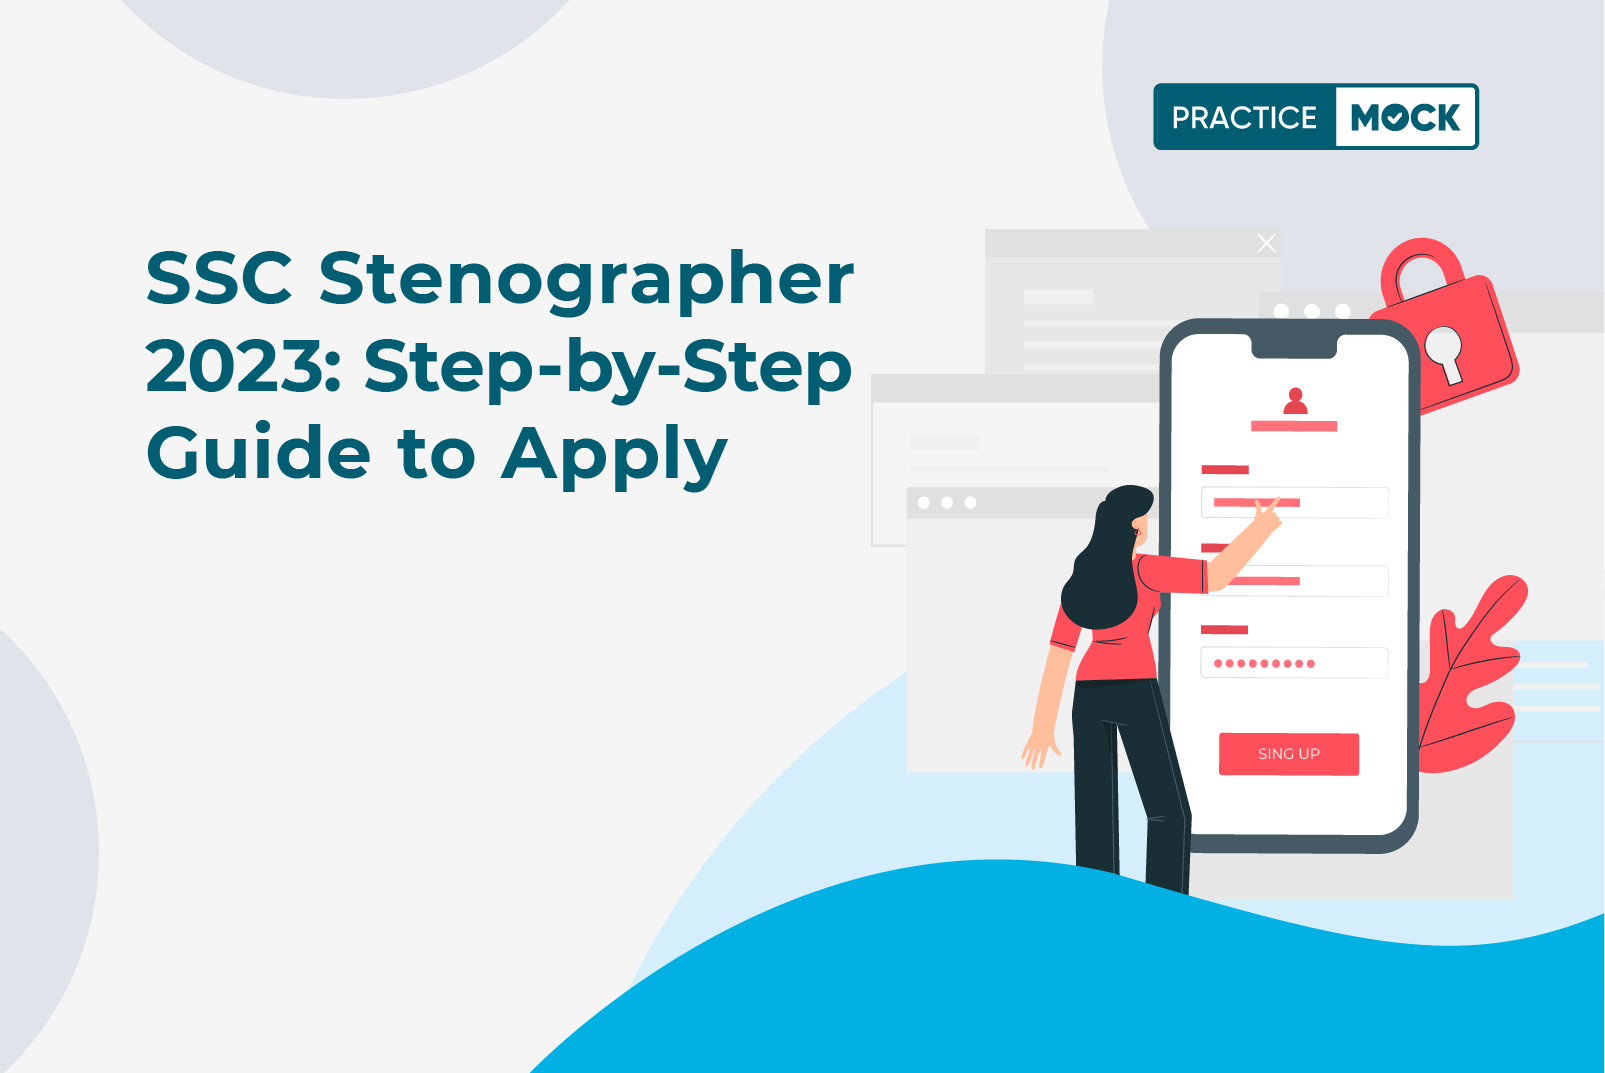 SSC Stenographer 2023: Step-by-Step Guide to Apply